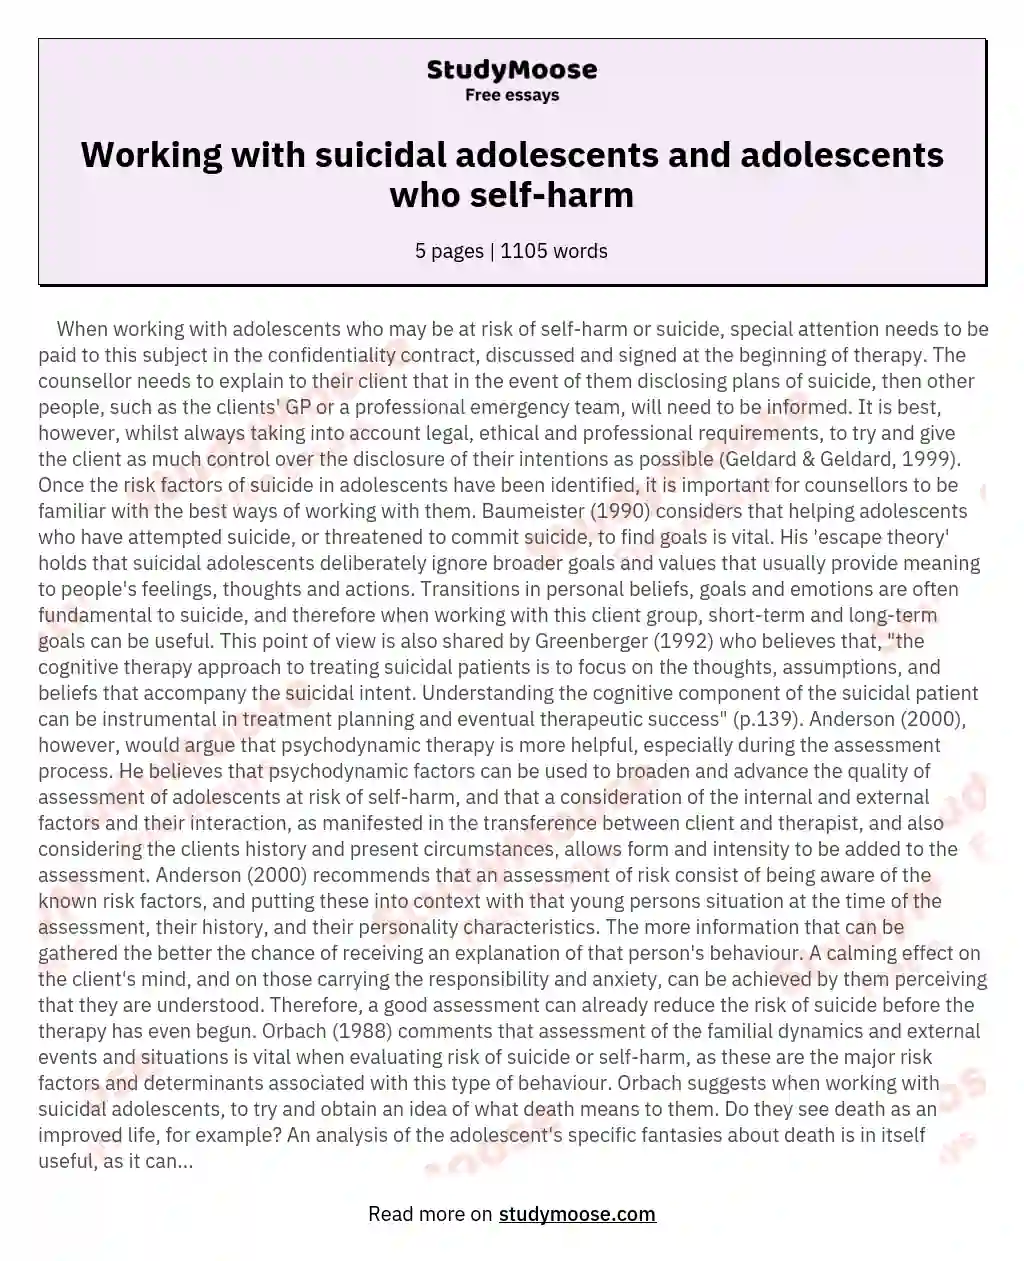 Working with suicidal adolescents and adolescents who self-harm